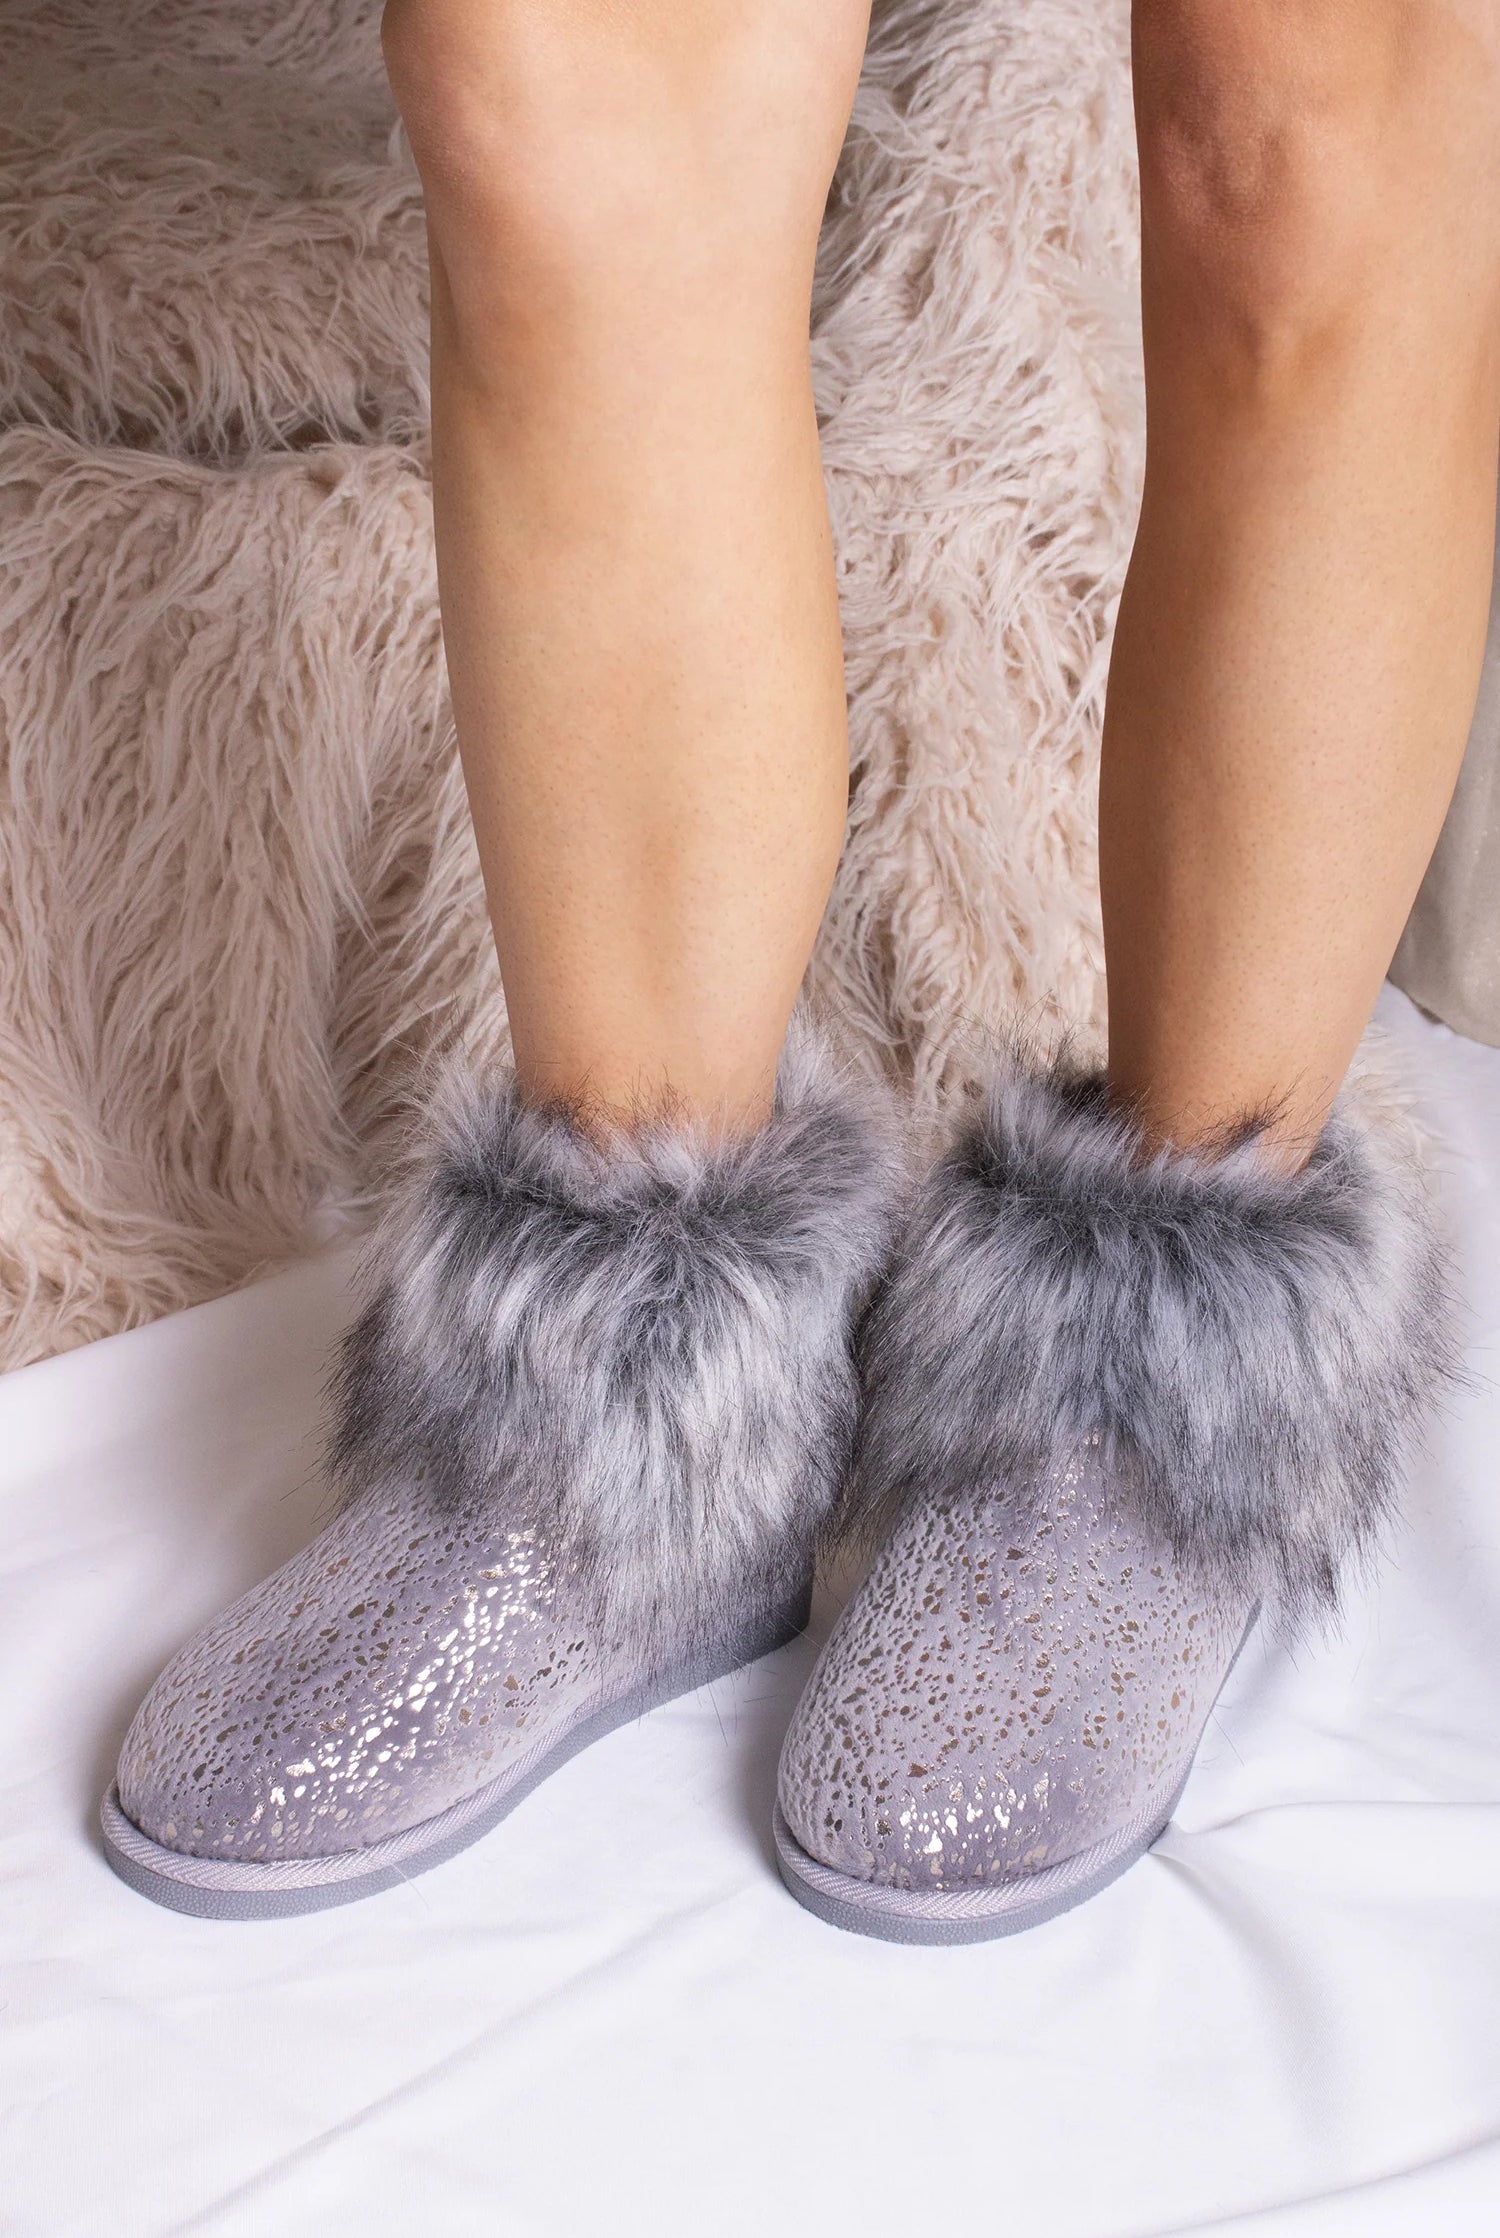 pretty you london slipper boots called giselle in grey fur